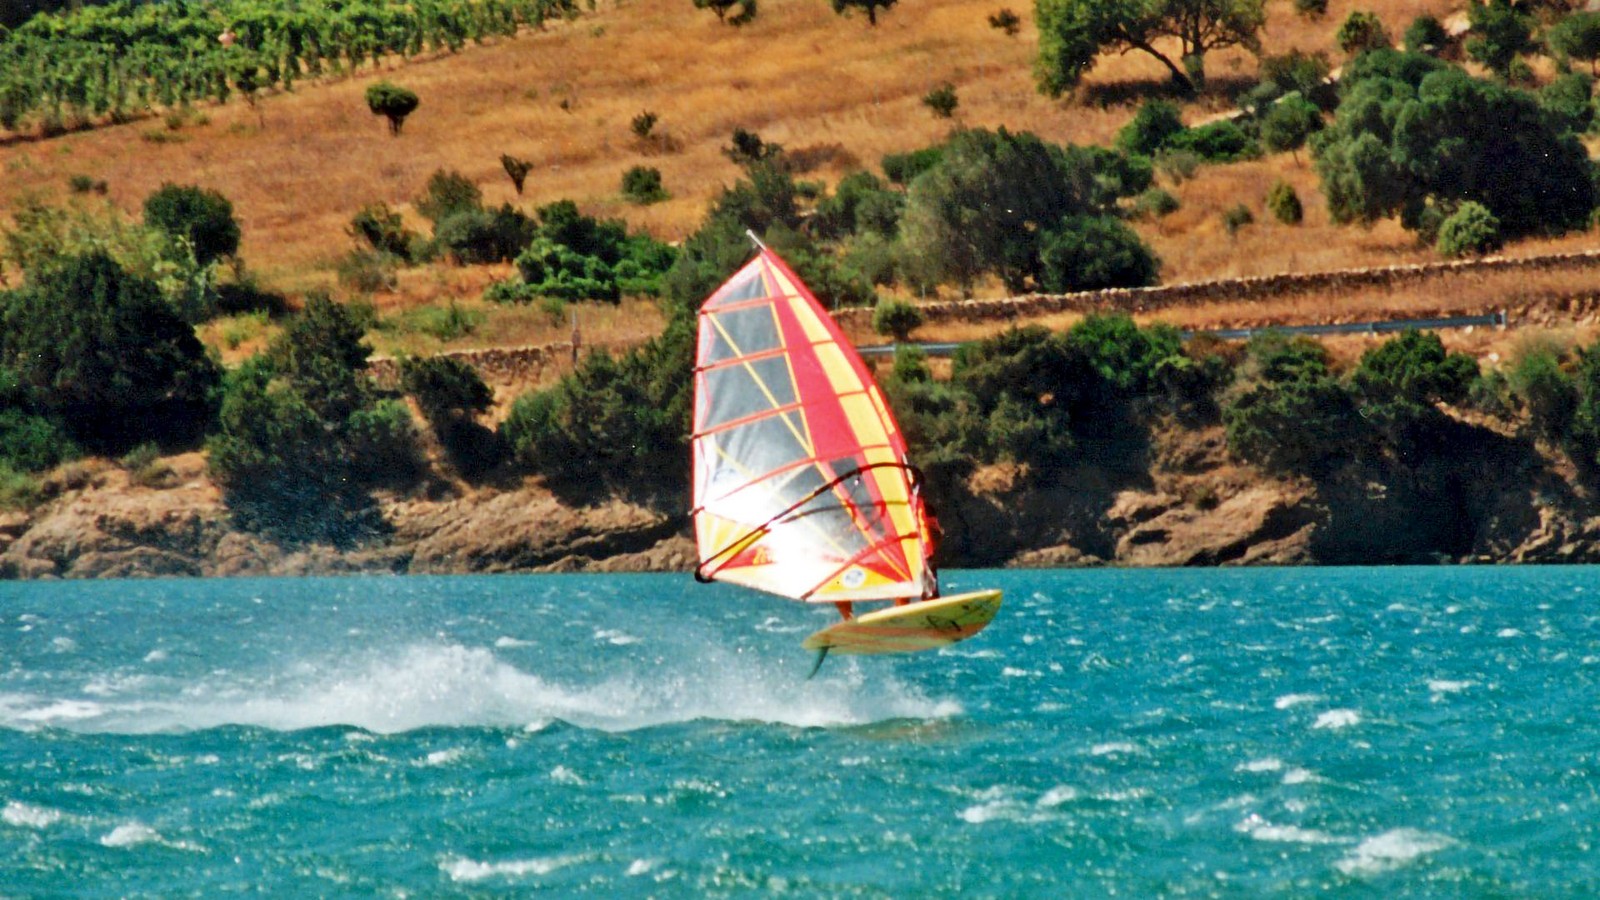 Windsurfing ; a love story that goes back to the 80s